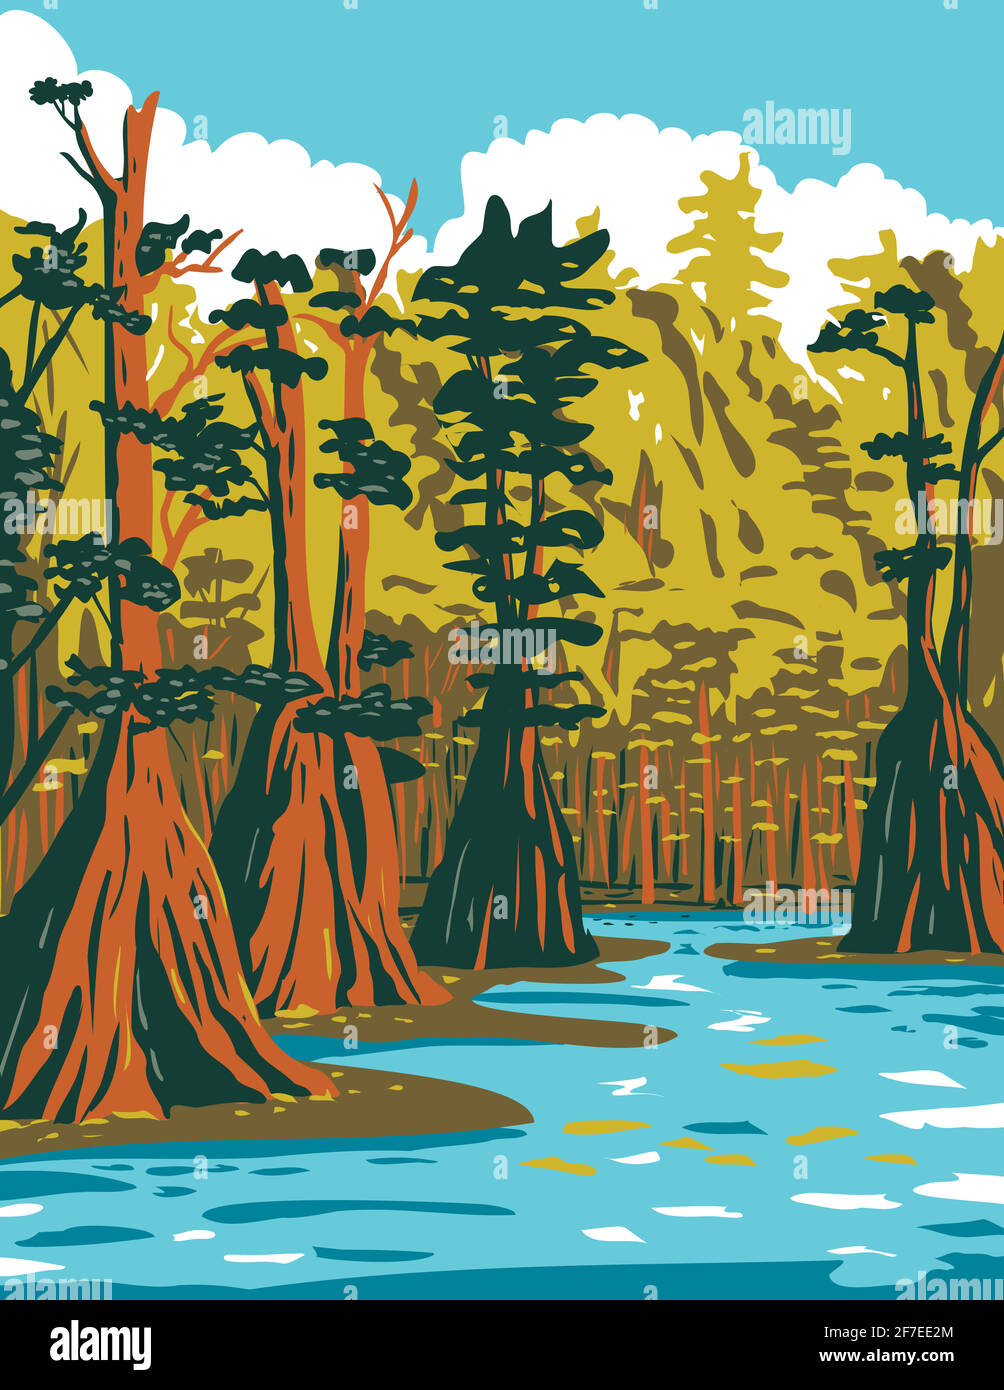 WPA poster art of baldcypress tree growing in the southern swamp of Apalachicola National Forest located in the Florida Panhandle in works project adm Stock Vector